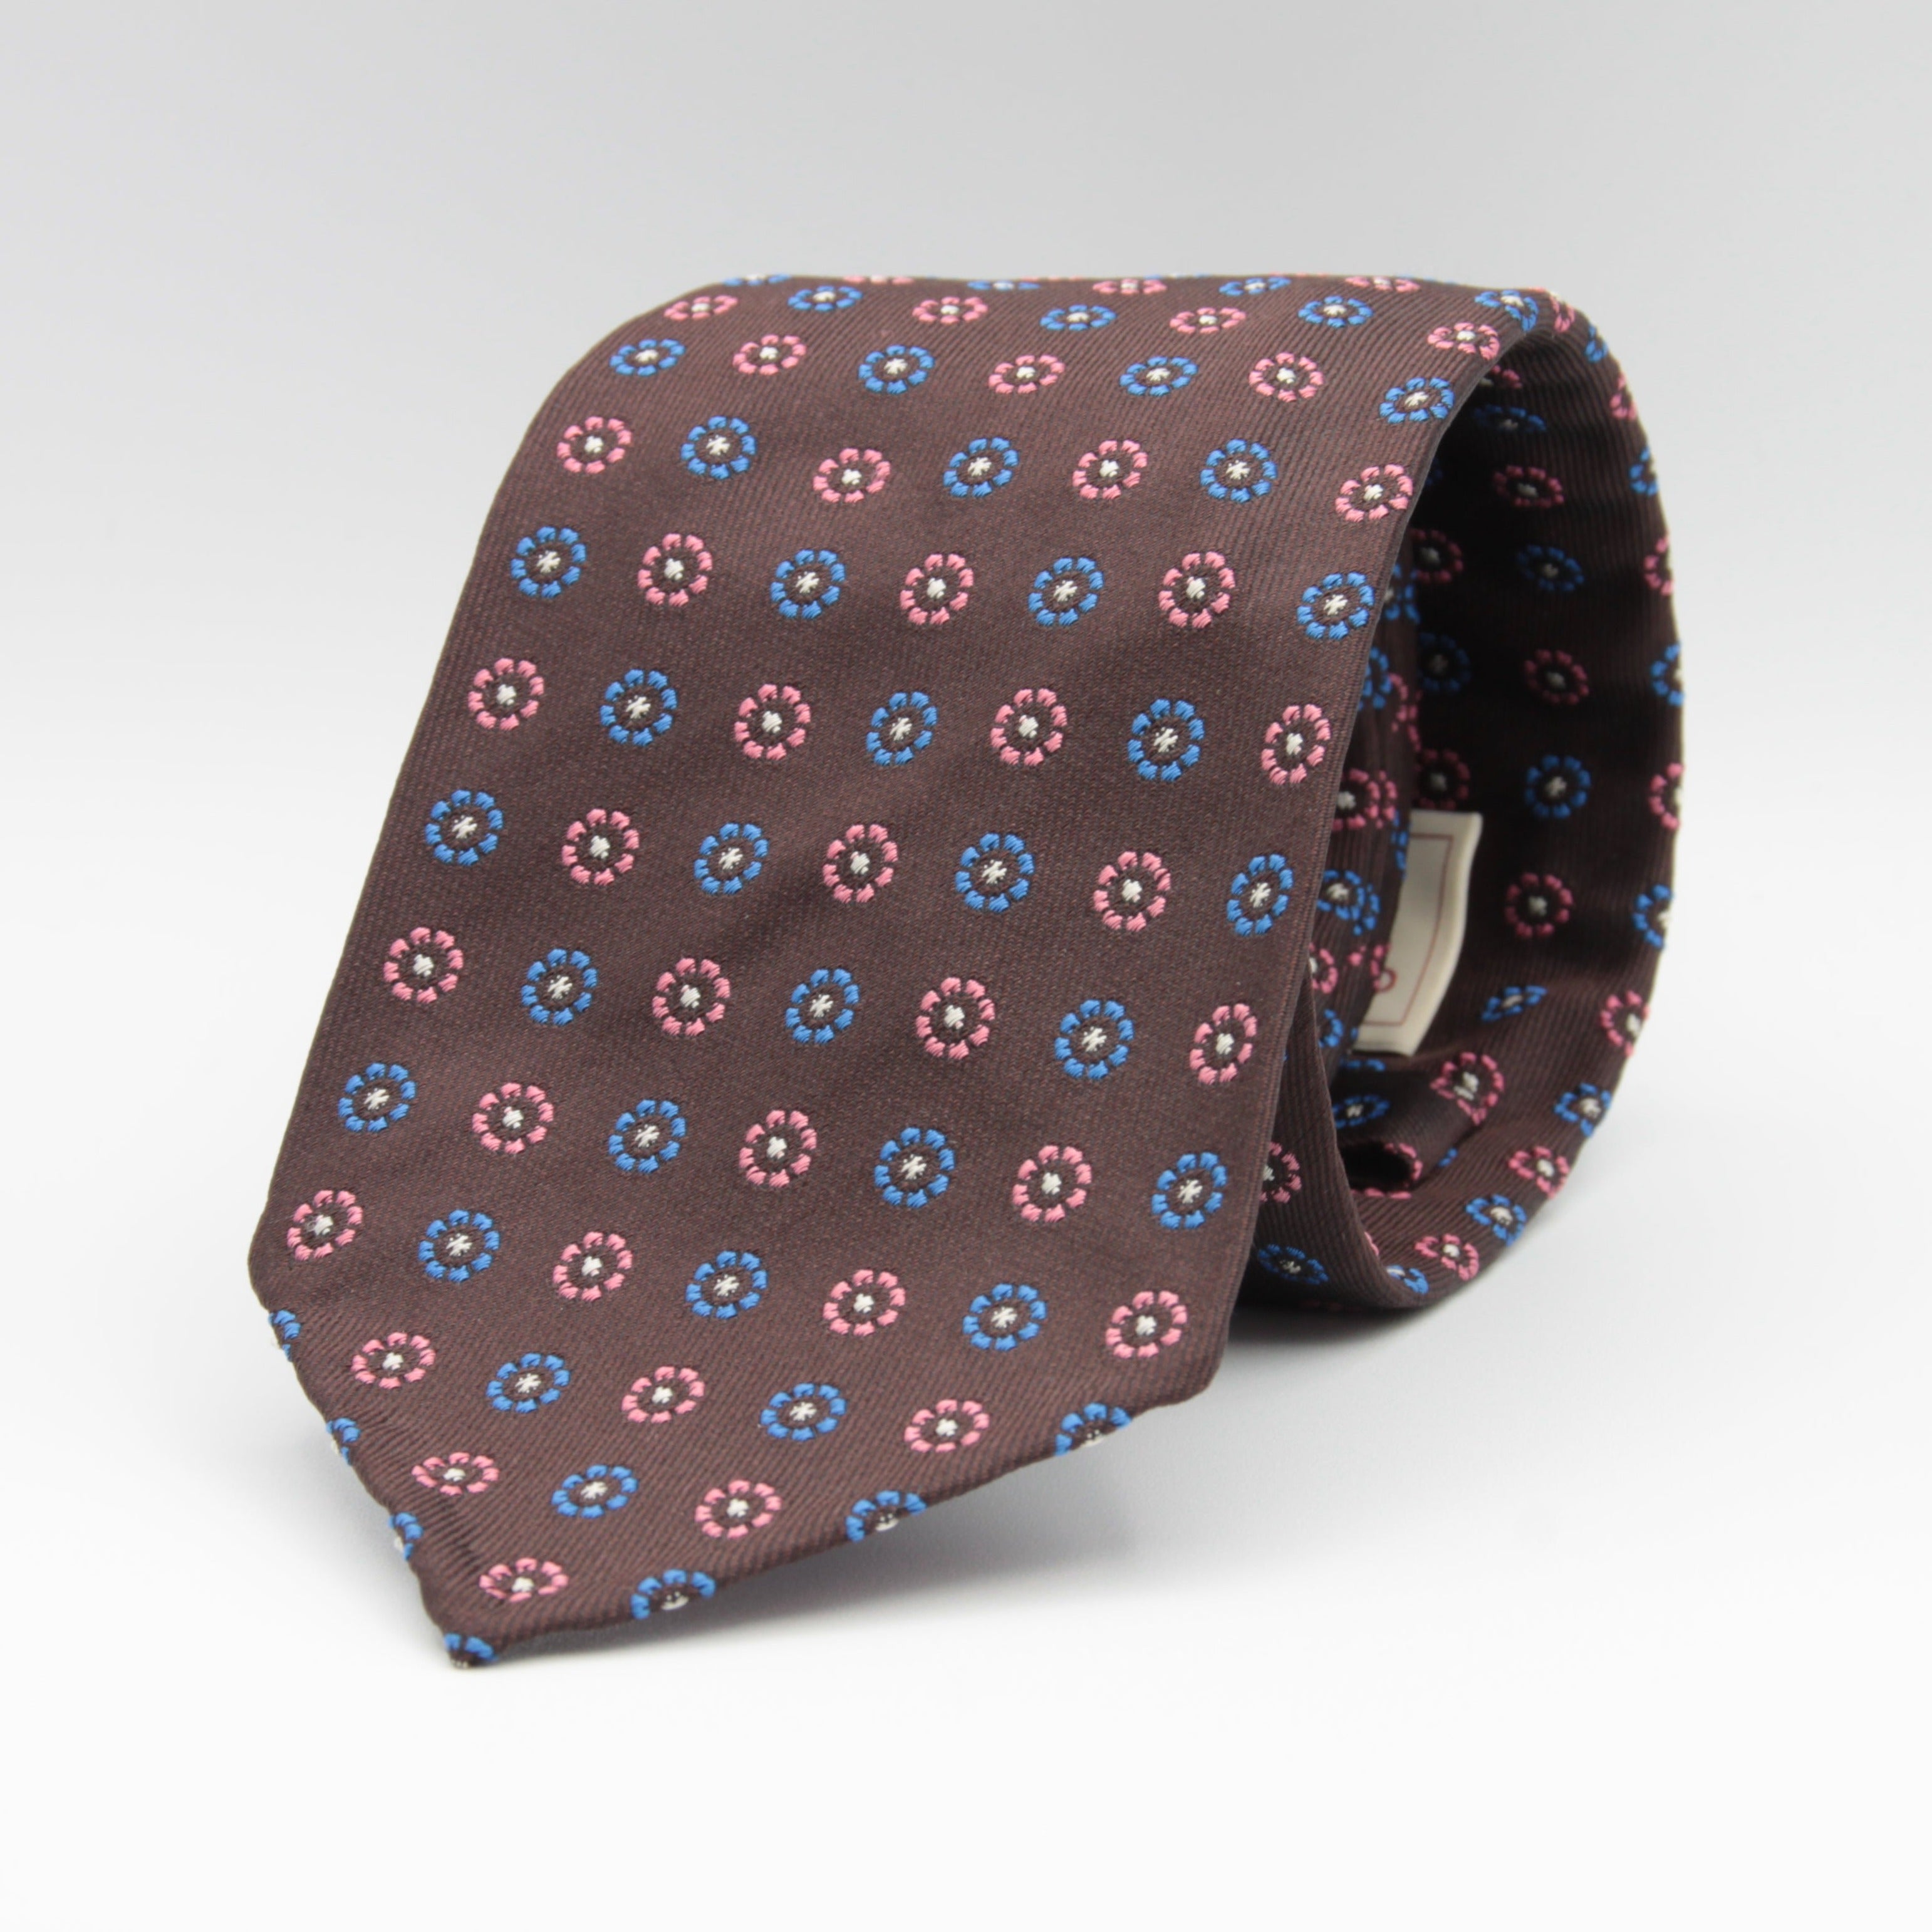 Cruciani & Bella 100% Woven Jacquard Silk Unlined Brown, Pink, Blue and White motif tie Handmade in England 8 x 153 cm #3868